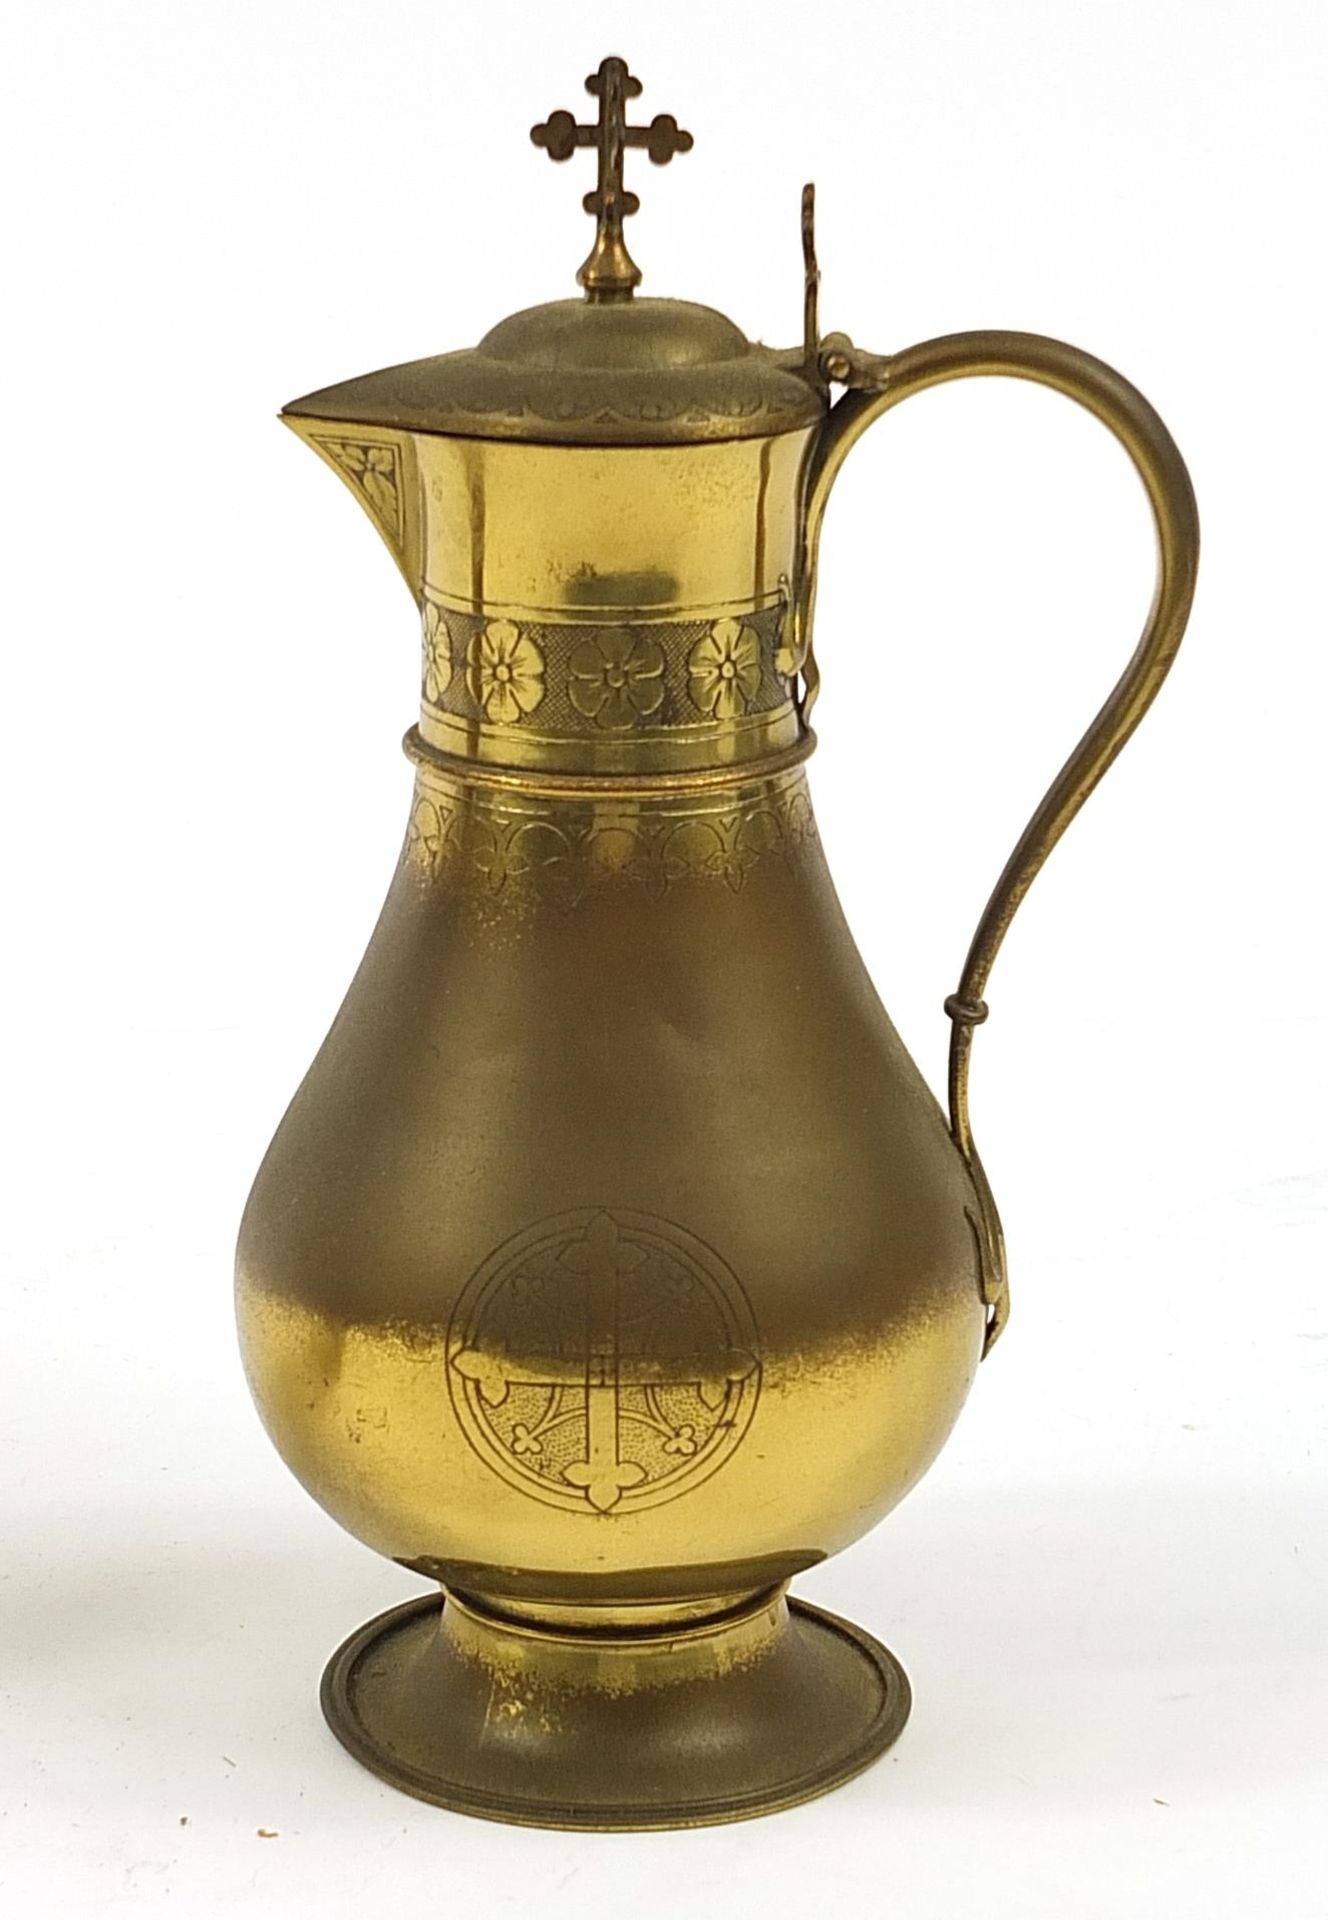 Antique gilt copper communion wine ewer and presentation plate engraved Presented to The Lady Abbess - Image 2 of 4